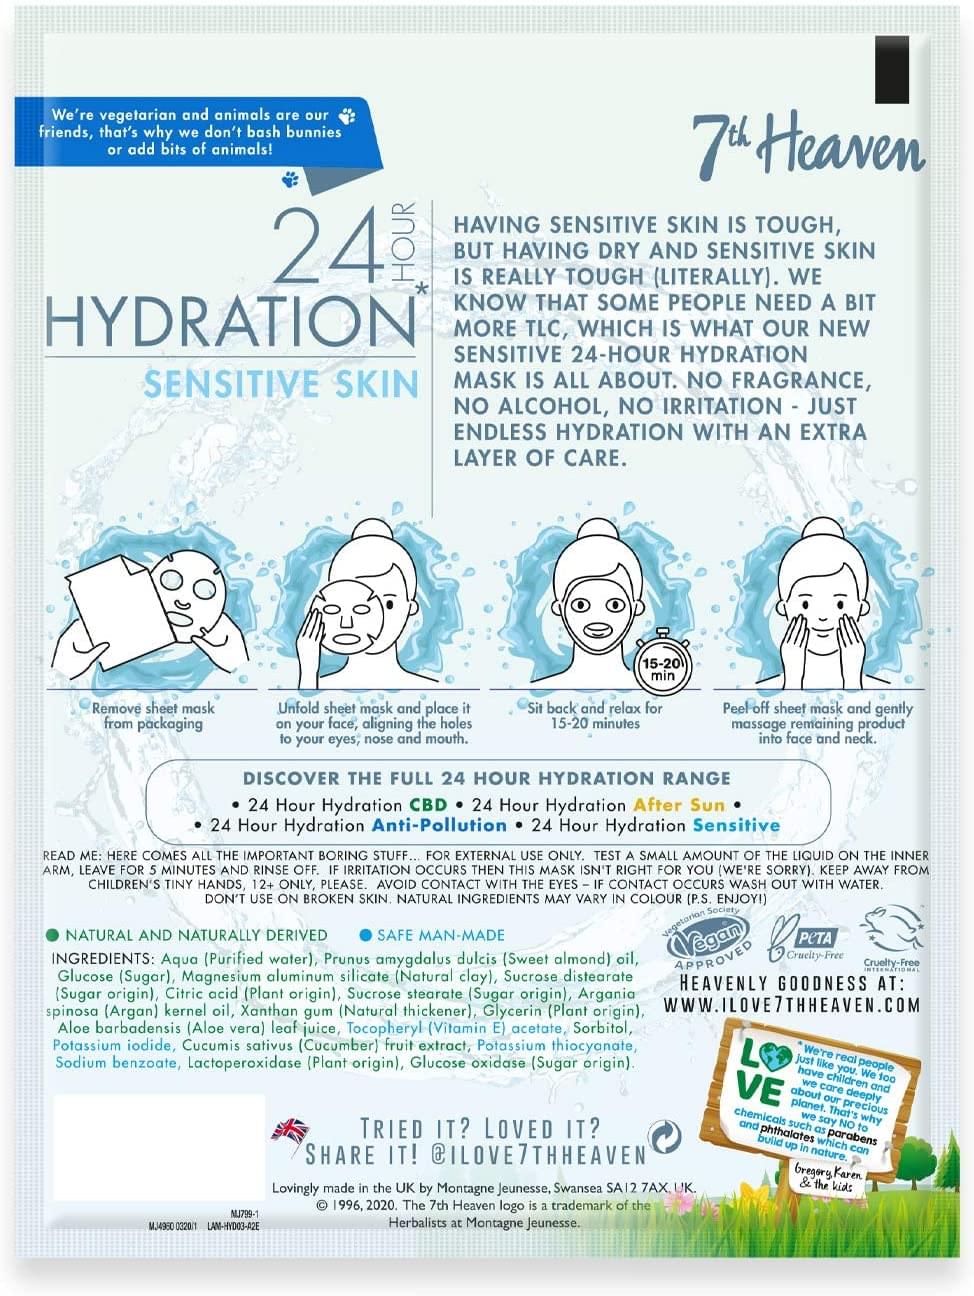 Load image into Gallery viewer, 7th Heaven 24h Hydration Sensitive Skin Sheet Mask 16g for Sensitive Skin Moisturising Fragrance Free Enriched with Vitamin E Clinically Proven Dermatologically Tested
